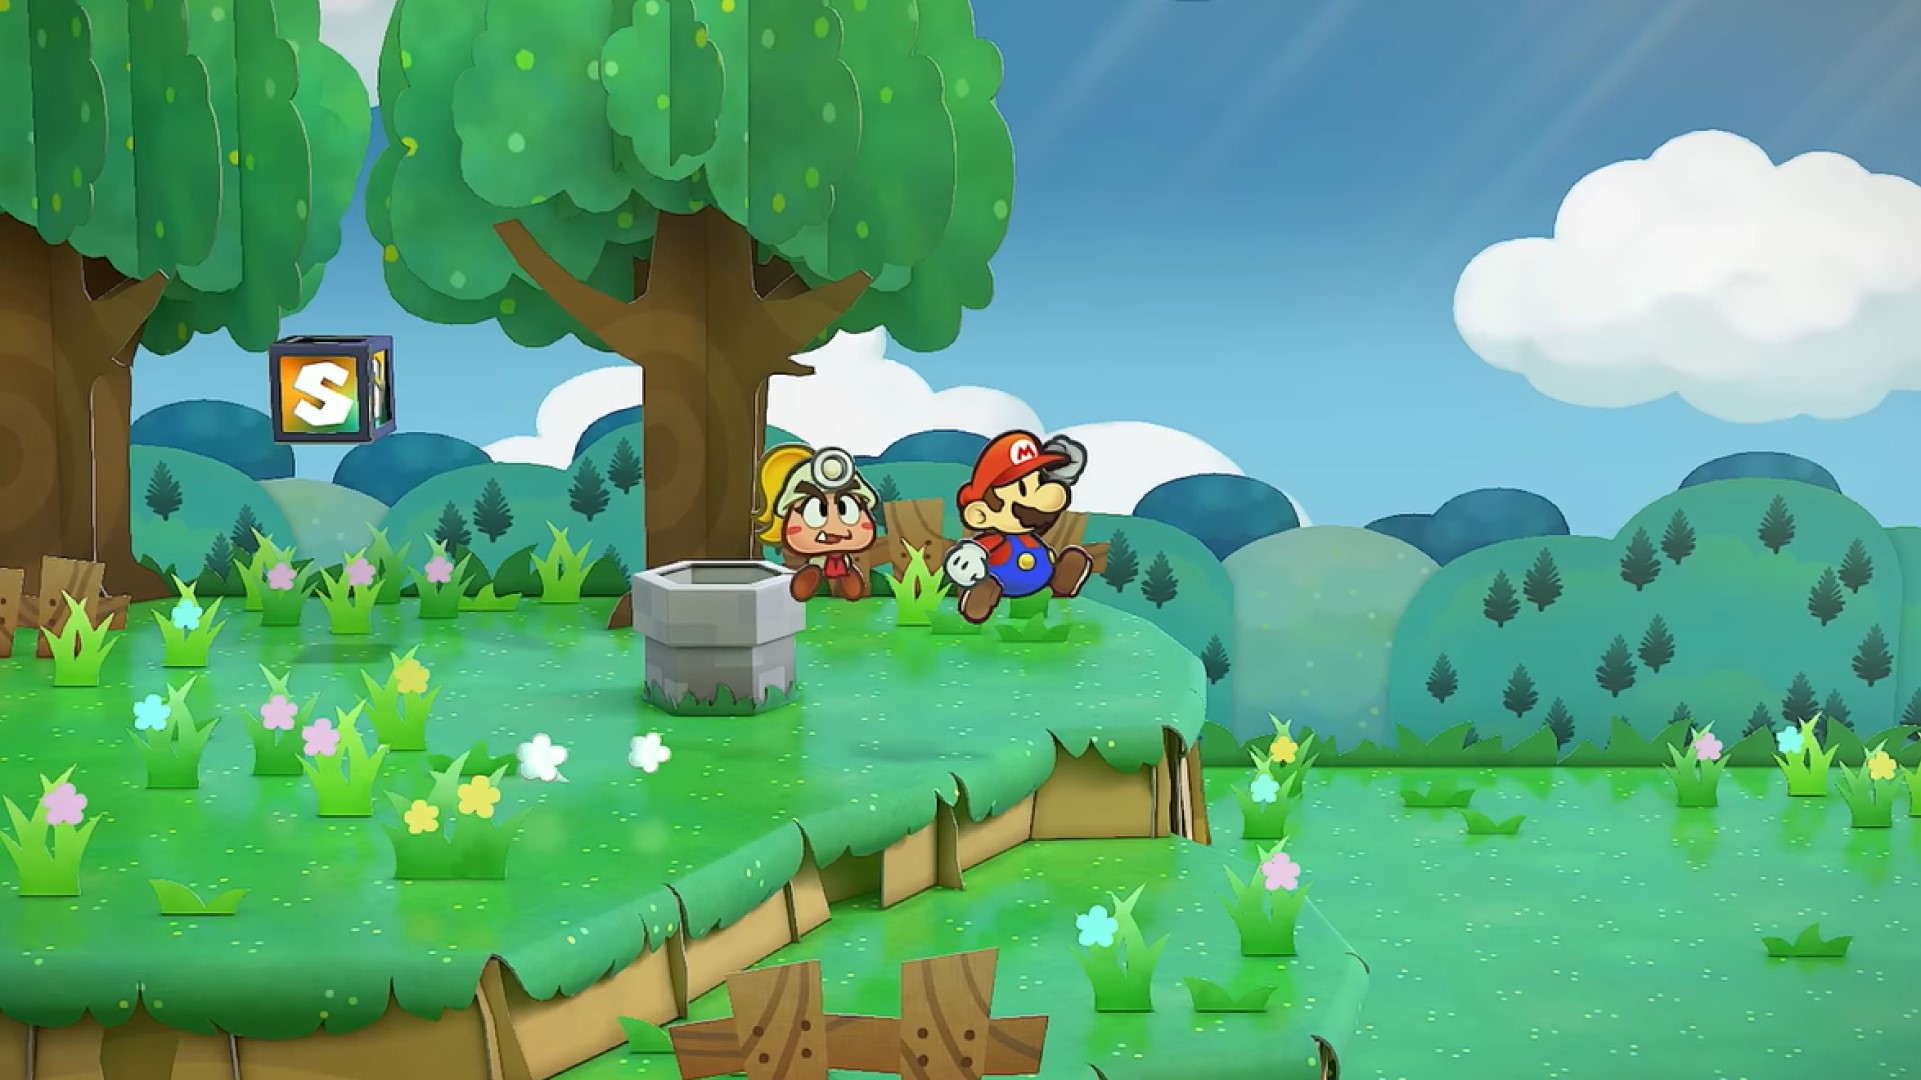 Paper Mario: The Thousand-Year Door Remake Adds Instant Party Swapping, Hint System, New NPCs, and More